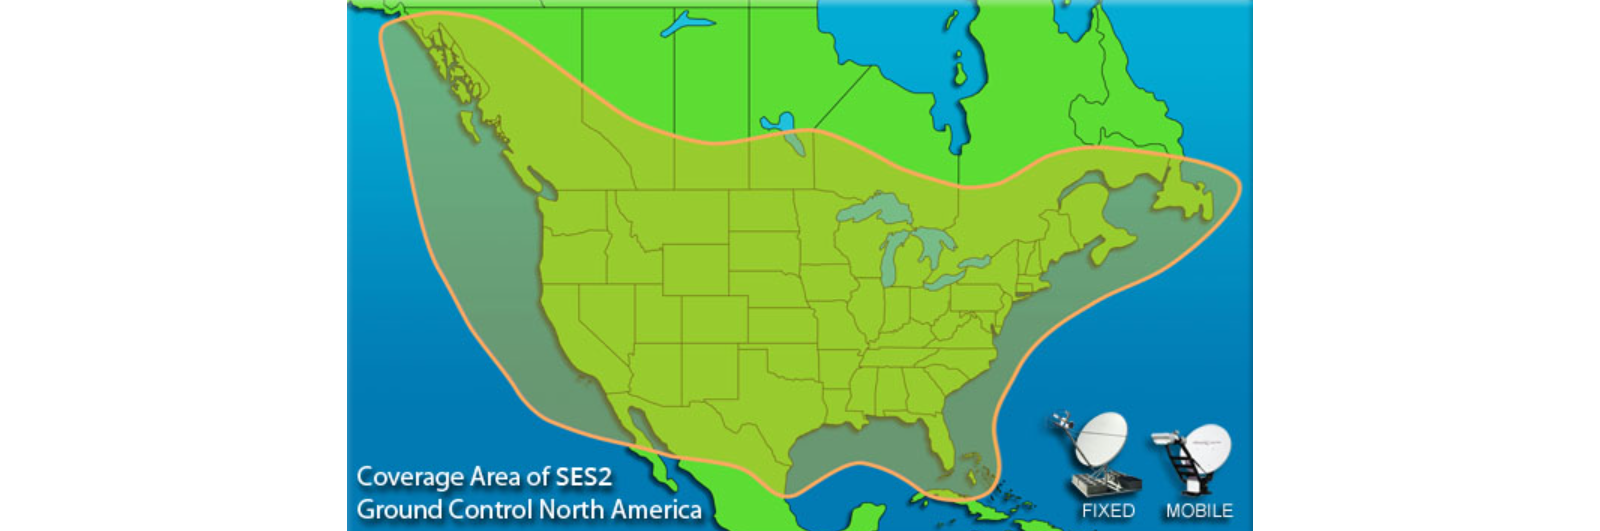 Coverage-Area-of-SES2